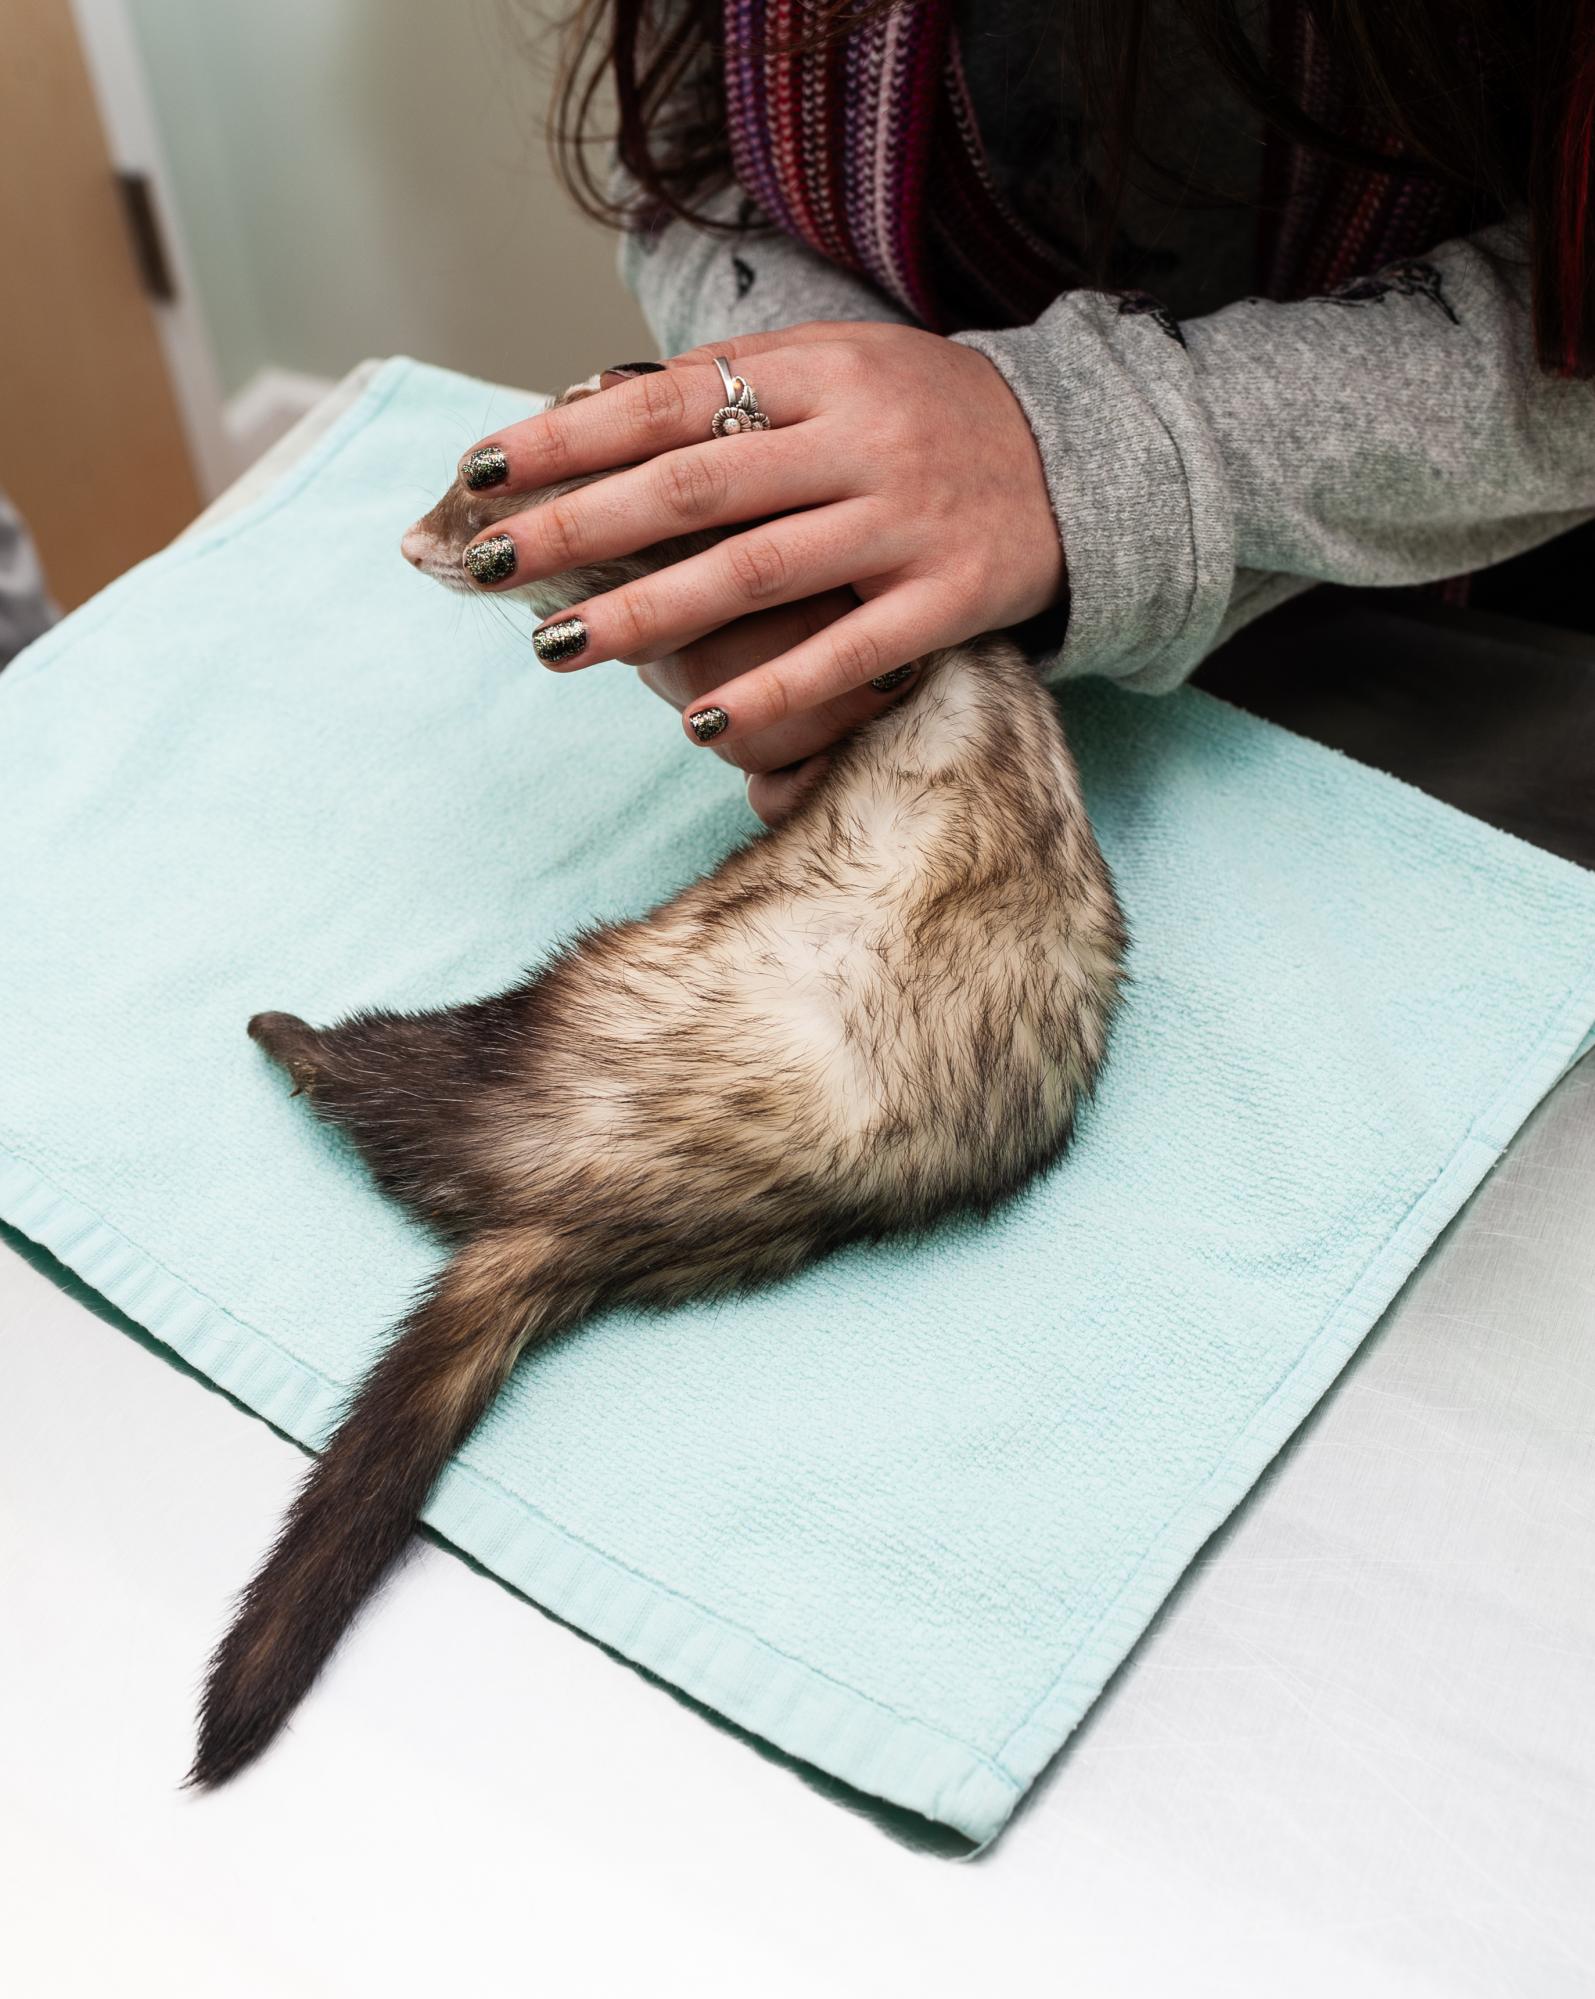 Displaced - A pet owner grapples with leaving her ferret overnight.